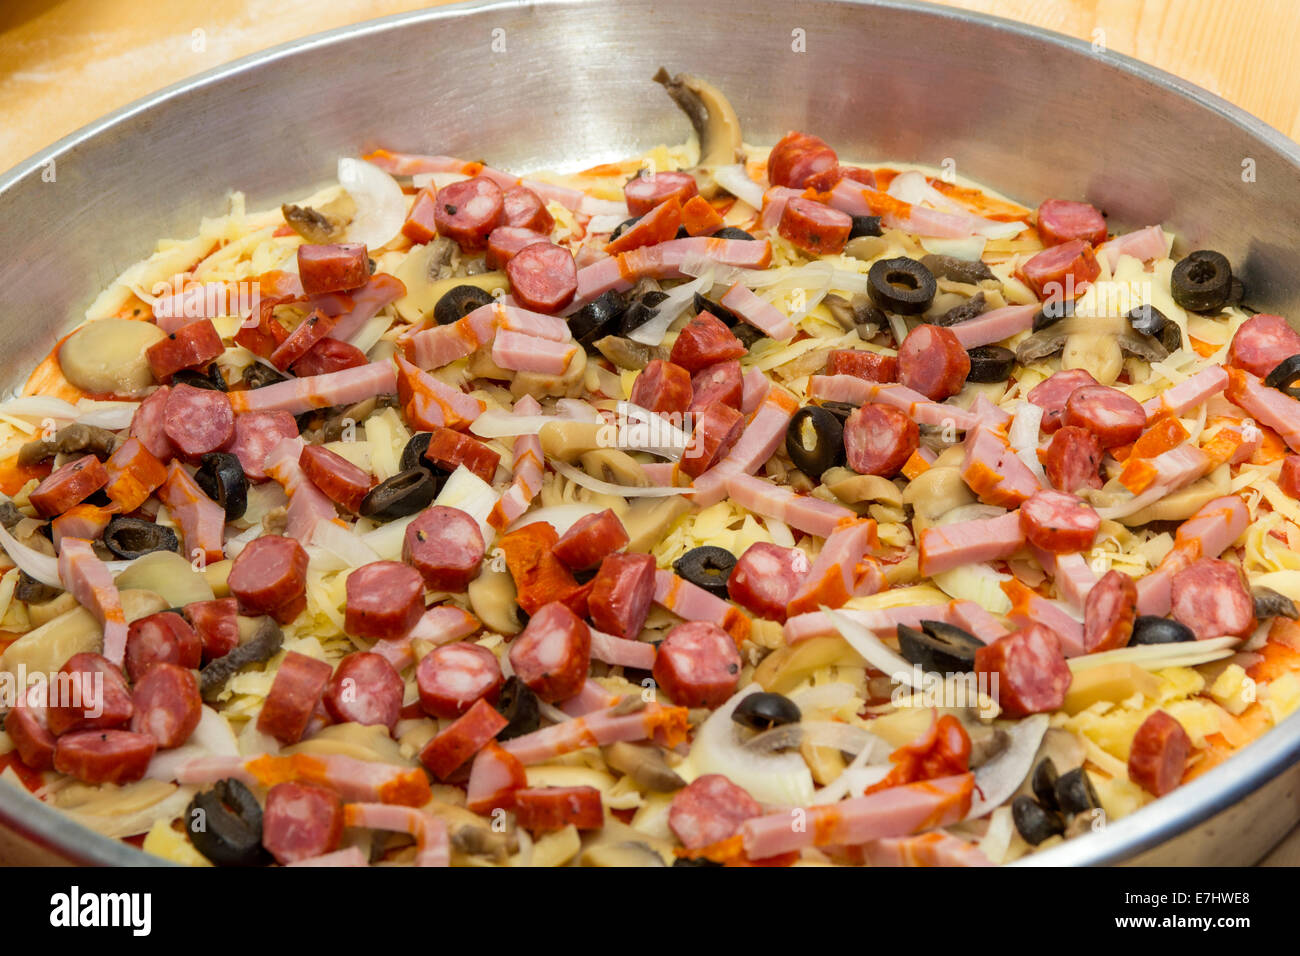 Close-up of unprepared pizza with tomatoes, mushrooms and meat Stock Photo